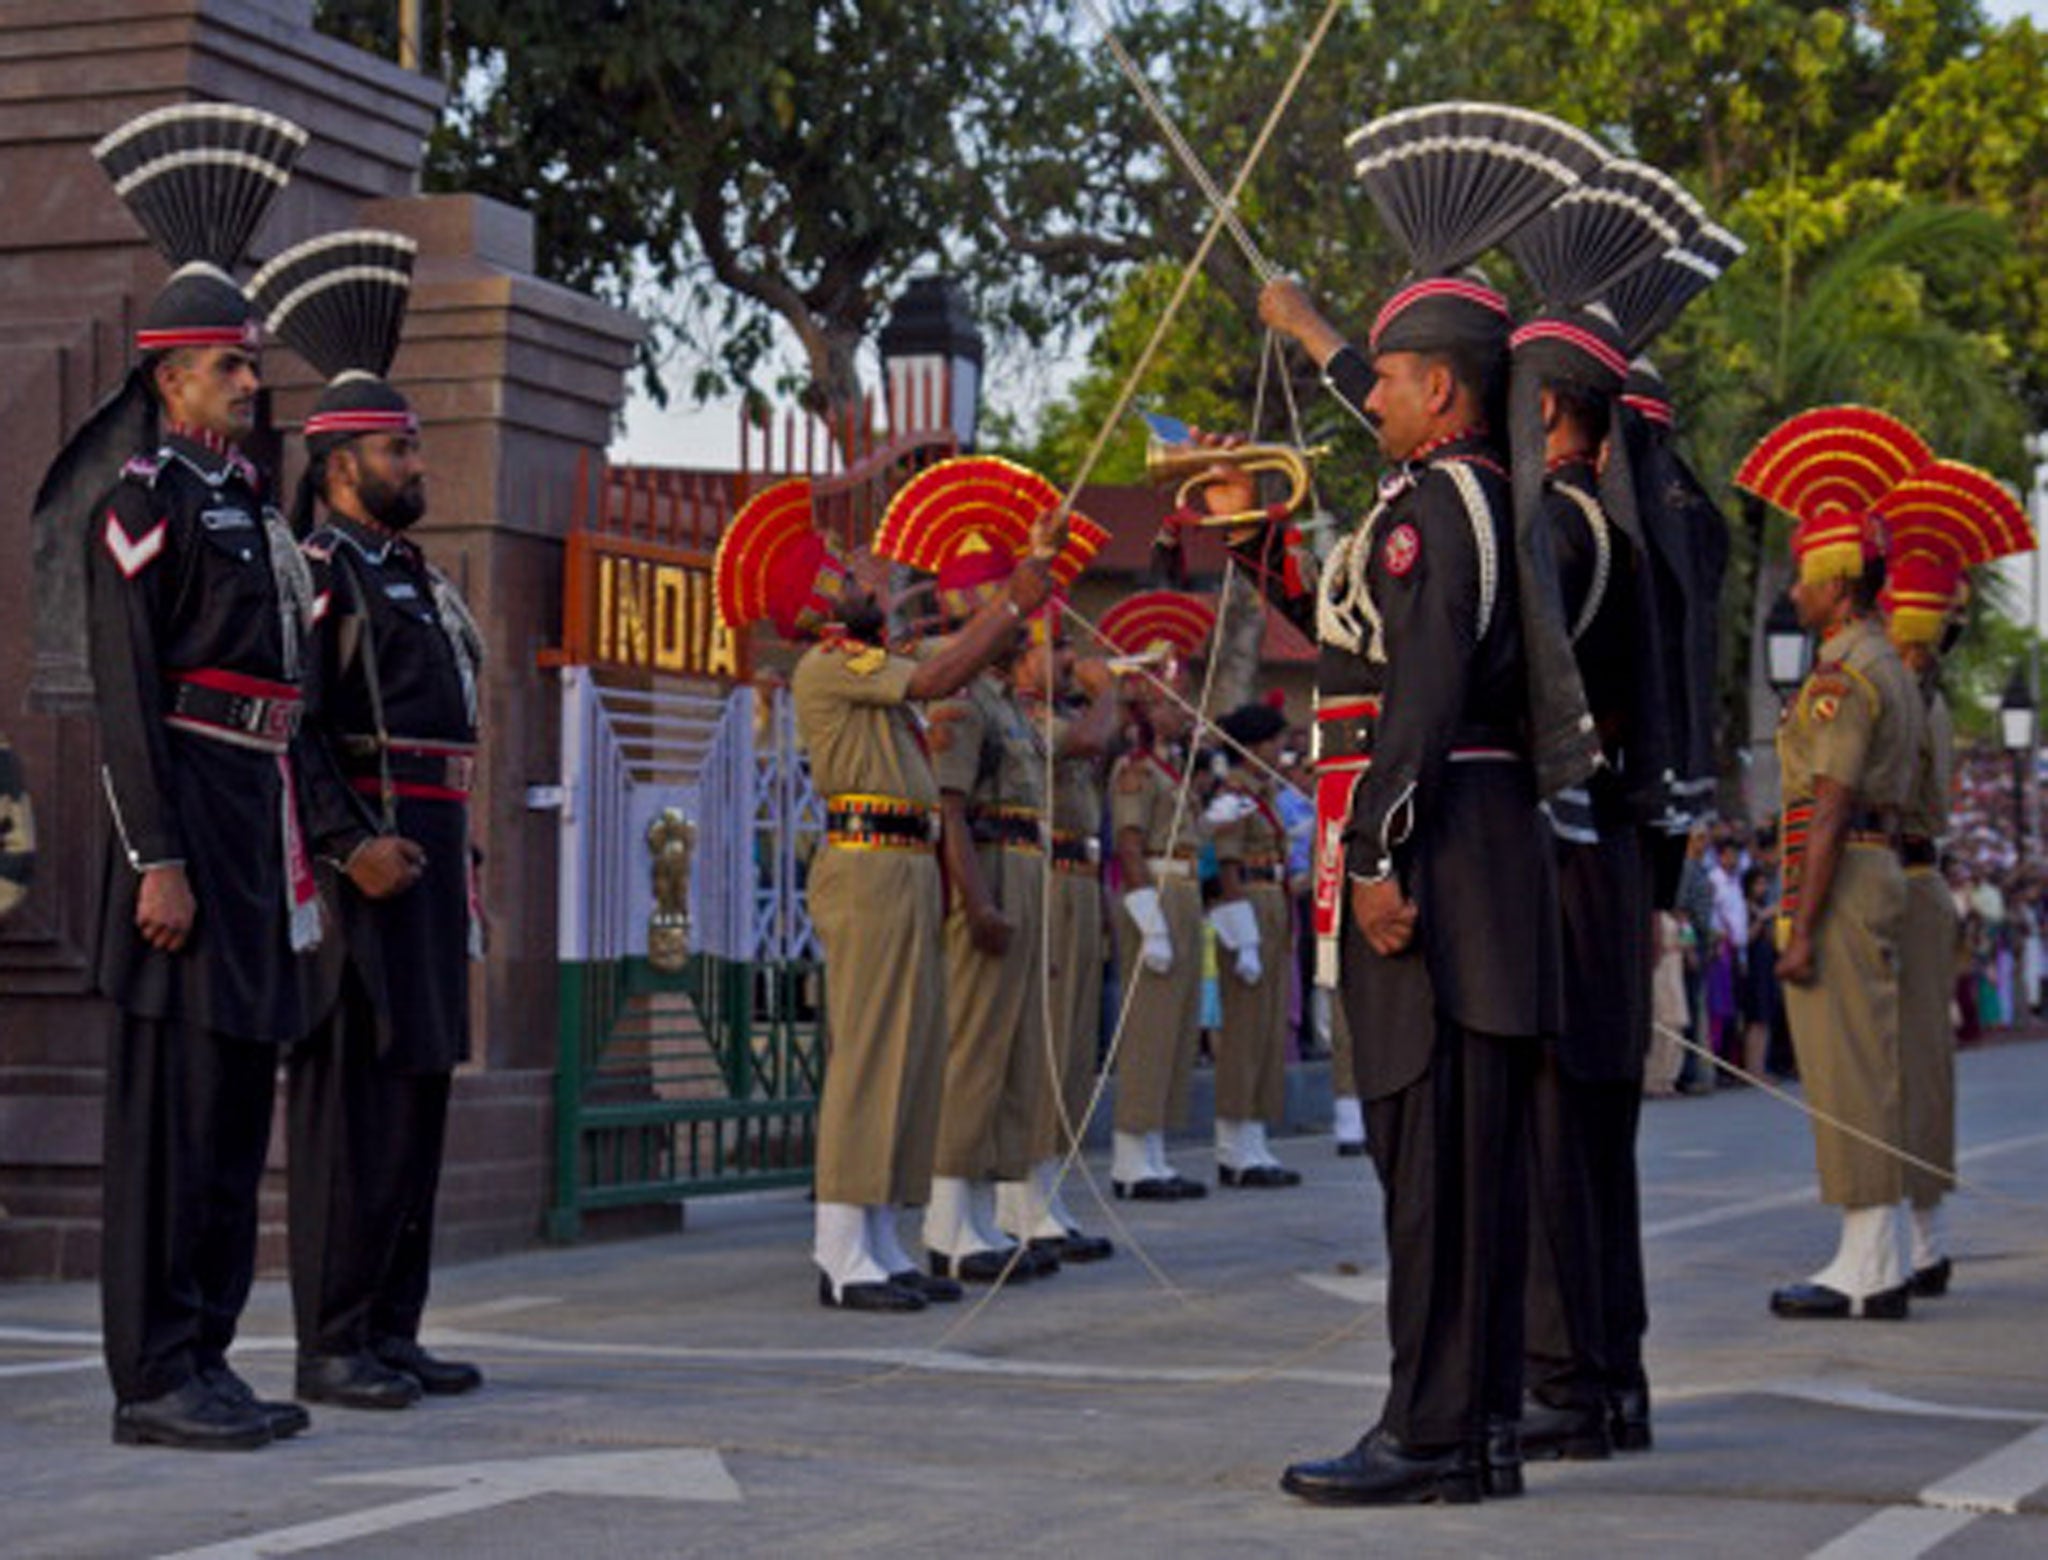 Guards march in parallel lines at the border separating Pakistan and India.